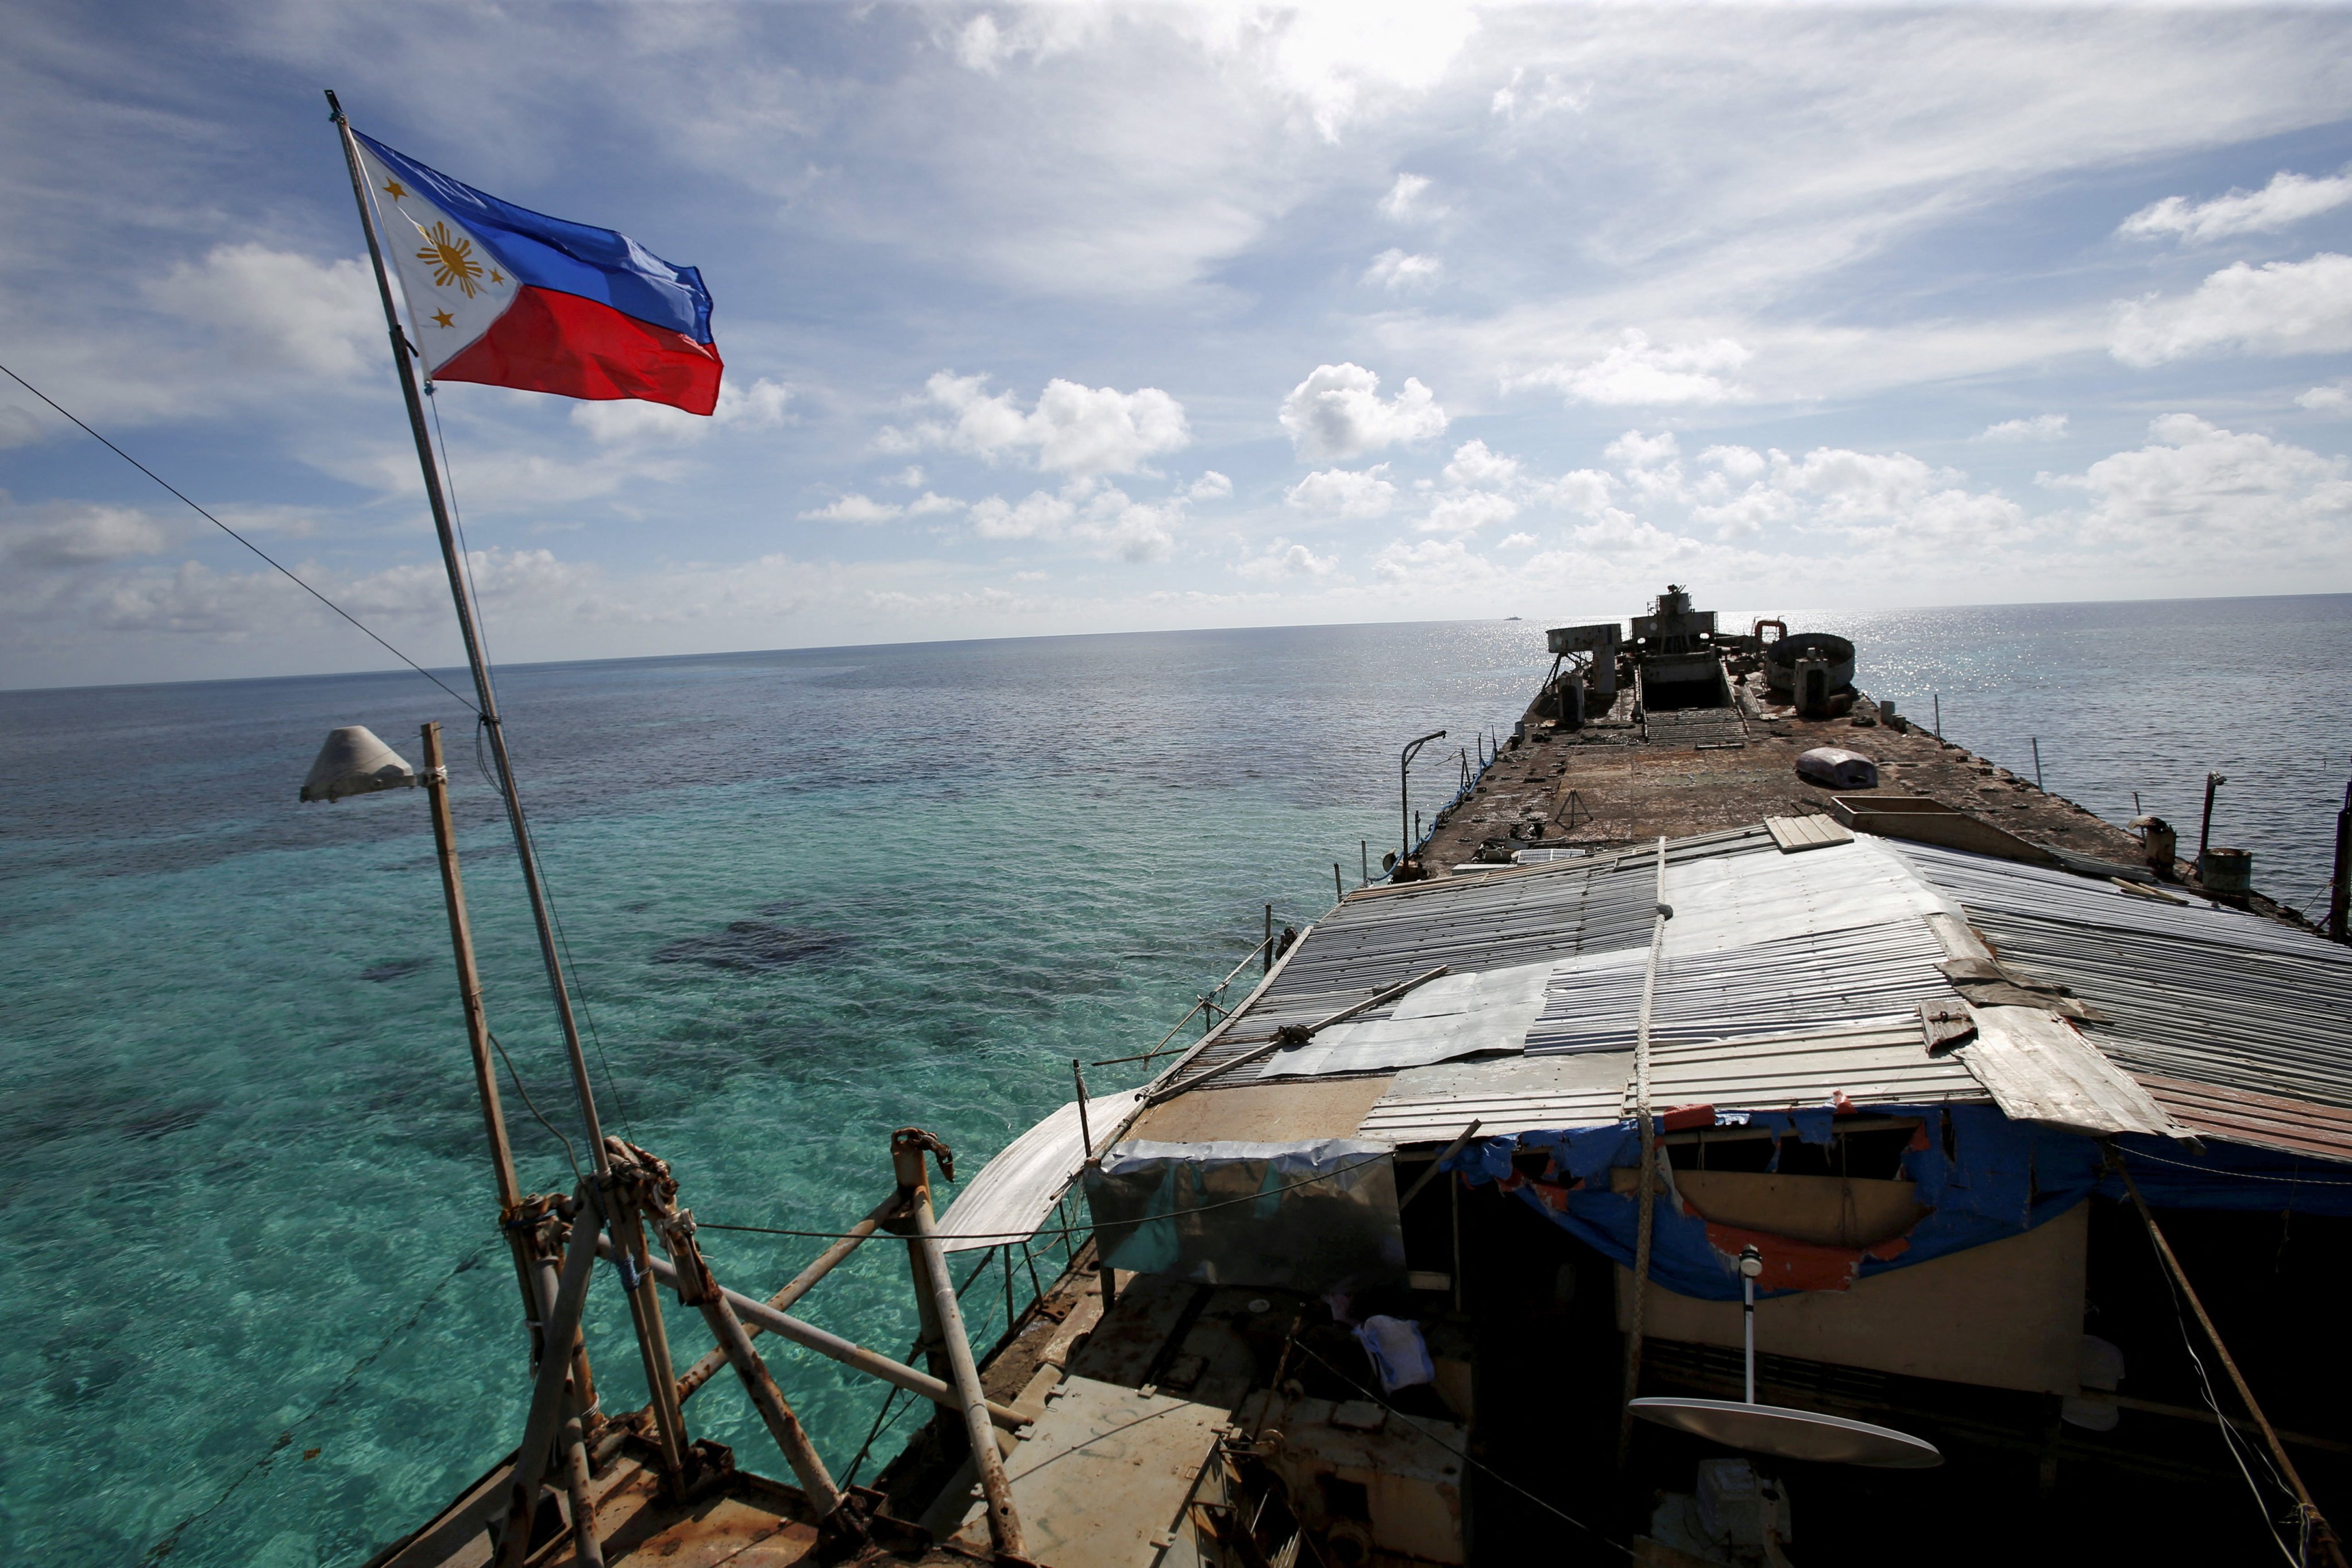 The BRP Sierra Madre was run aground at the Second Thomas Shoal in 1999. Photo: Reuters